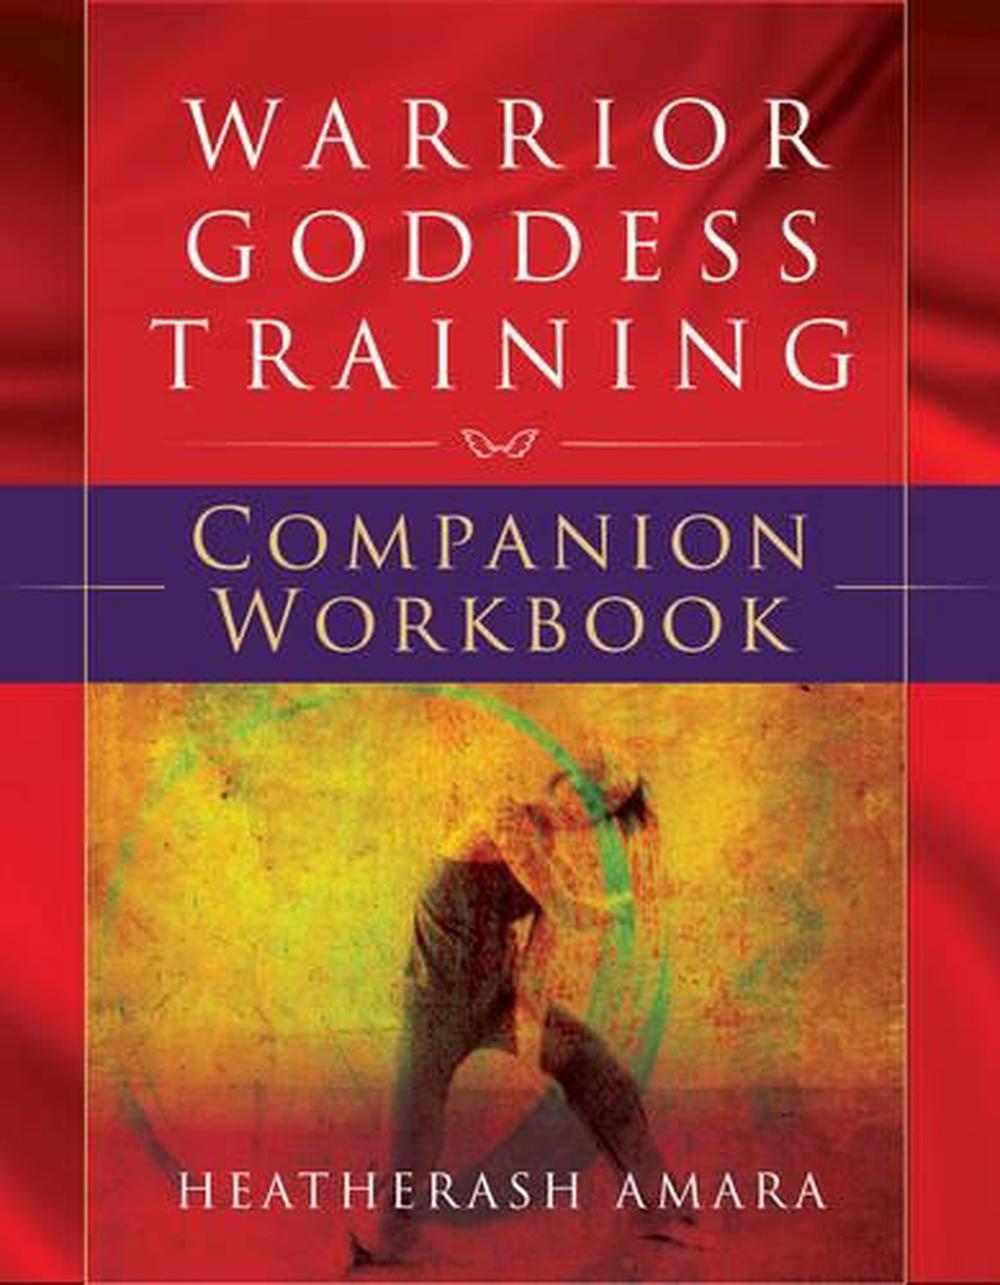  Warrior goddess workout for Build Muscle